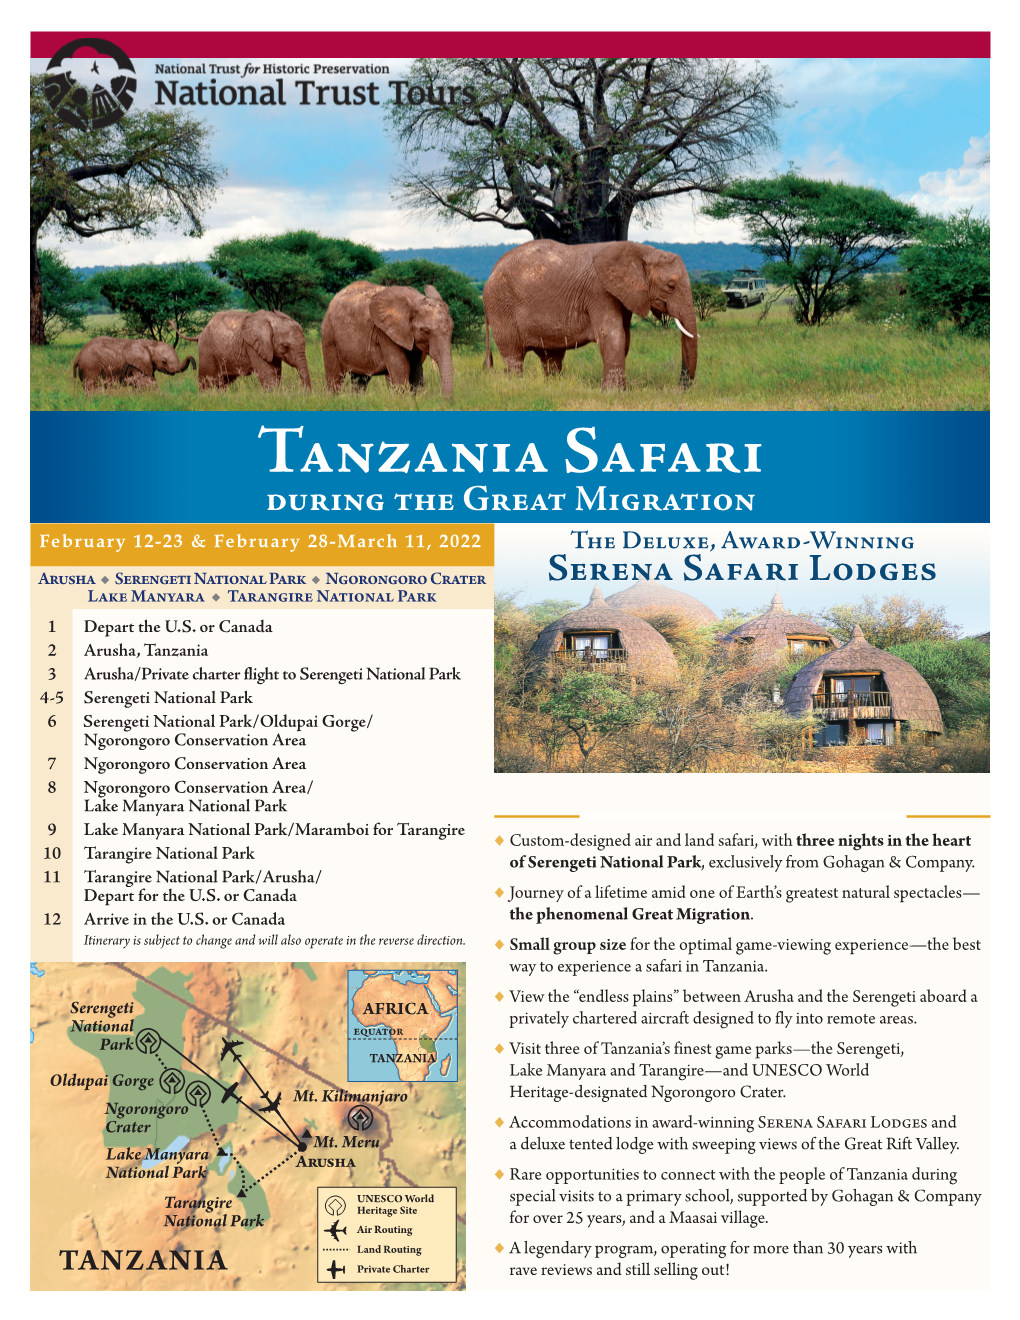 Tanzania Safari During the Great Migration February 12-23 & February 28-March 11, 2022 the Deluxe, Award-Winning